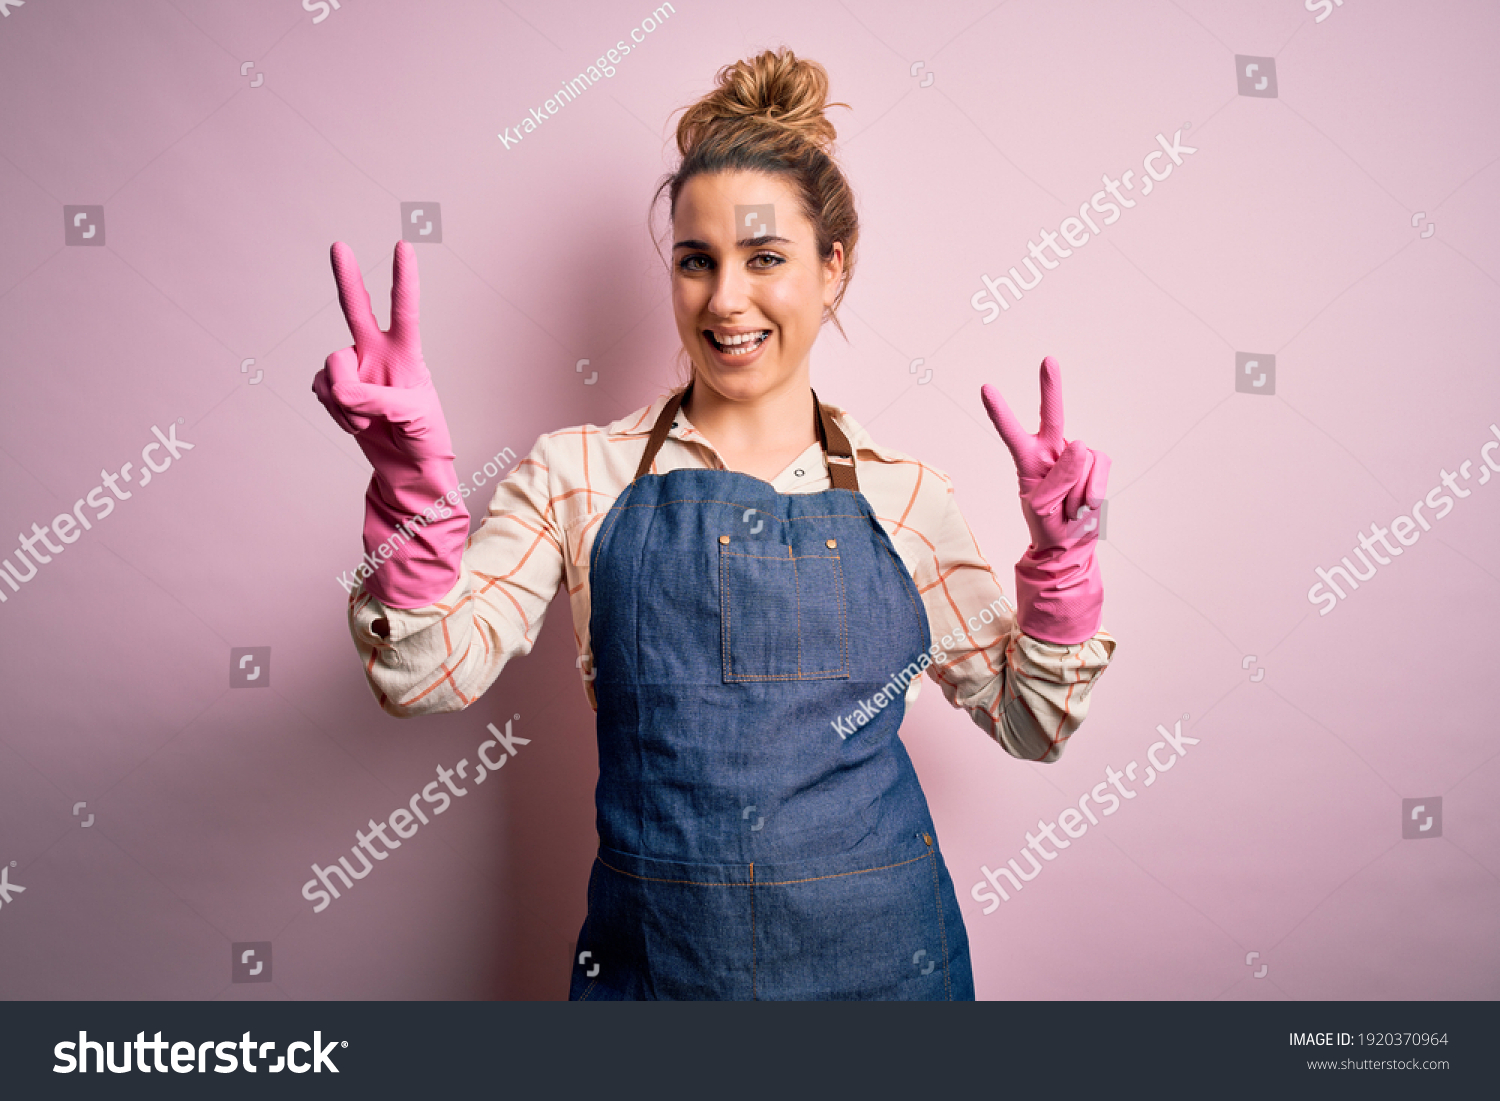 Young beautiful blonde cleaner woman doing housework wearing arpon and gloves smiling looking to the camera showing fingers doing victory sign. Number two. #1920370964